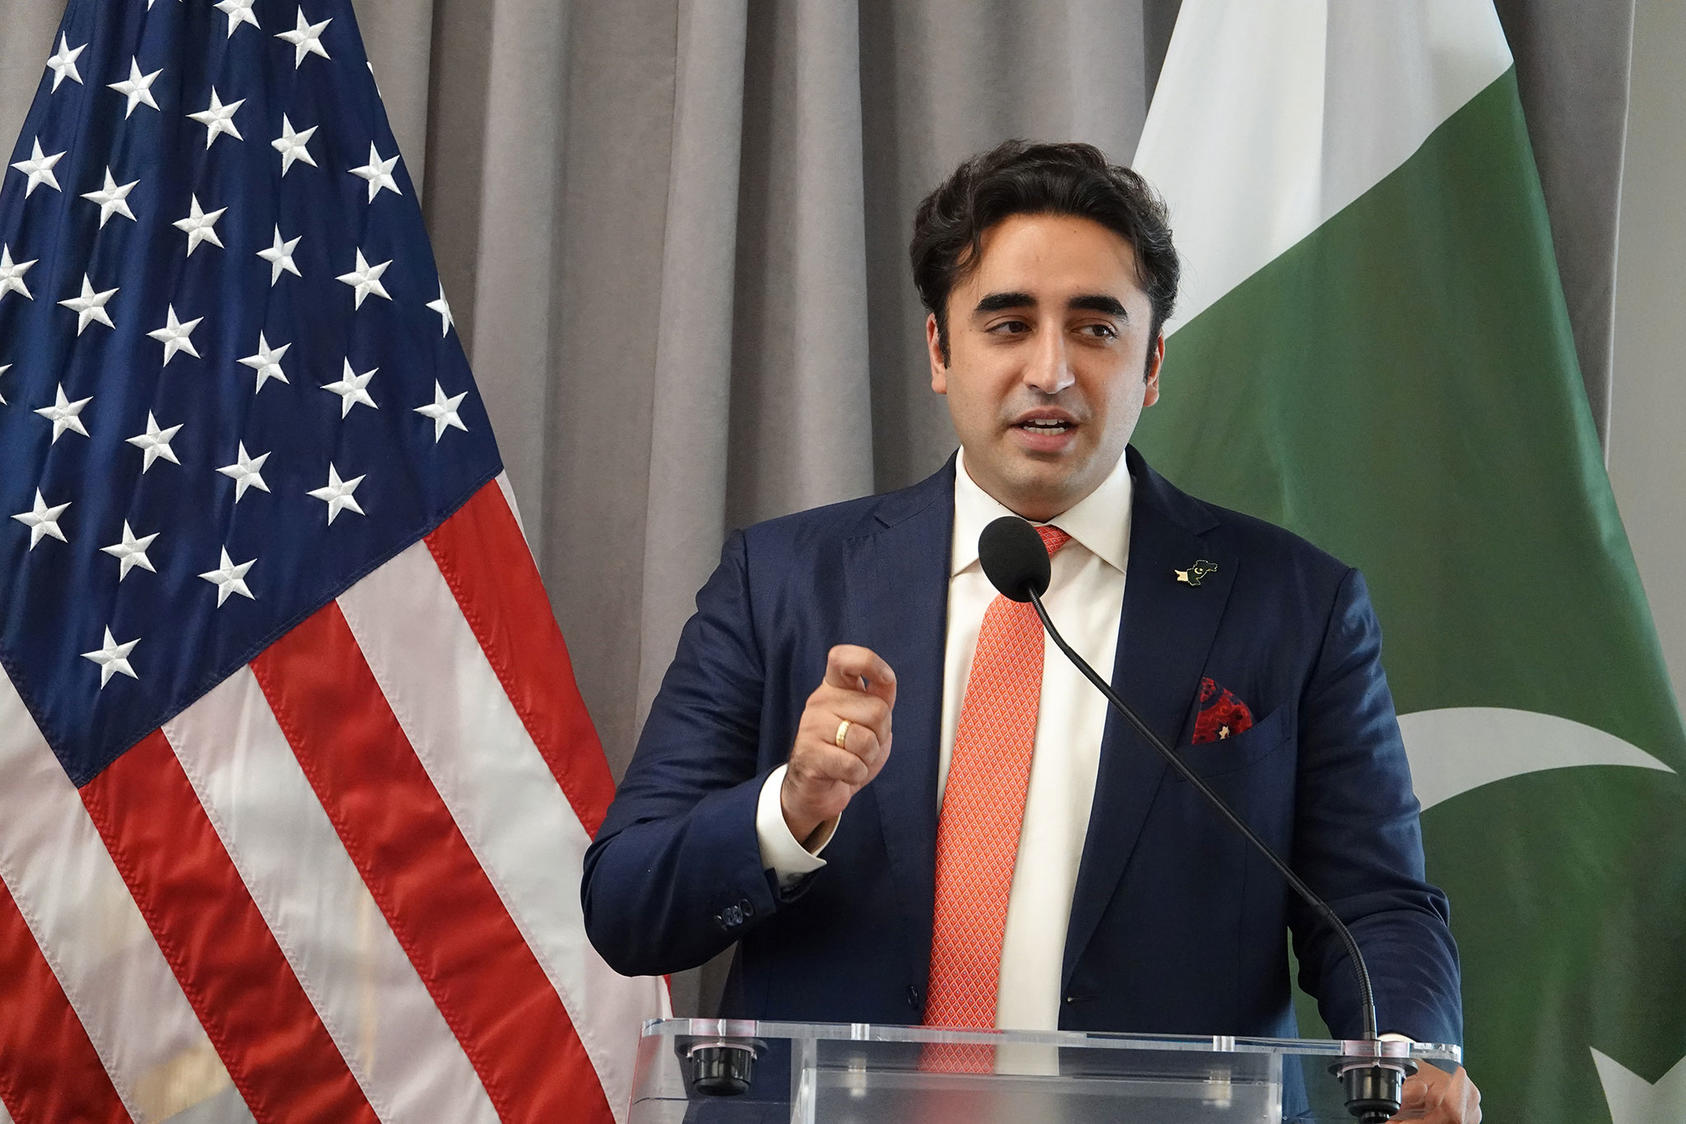 In a September 2022 visit to Washington DC, Pakistan’s Foreign Minister Bilawal Bhutto Zardari speaks to an audience of U.S. officials and policy experts. In his speech, Bhutto Zardari discussed the 2022 flooding that displaced 33 million in Pakistan and resulted in one-third of the country being underwater. The foreign minister called for a global response to the flooding that could build a system that would support the developing countries most vulnerable to climate disasters.